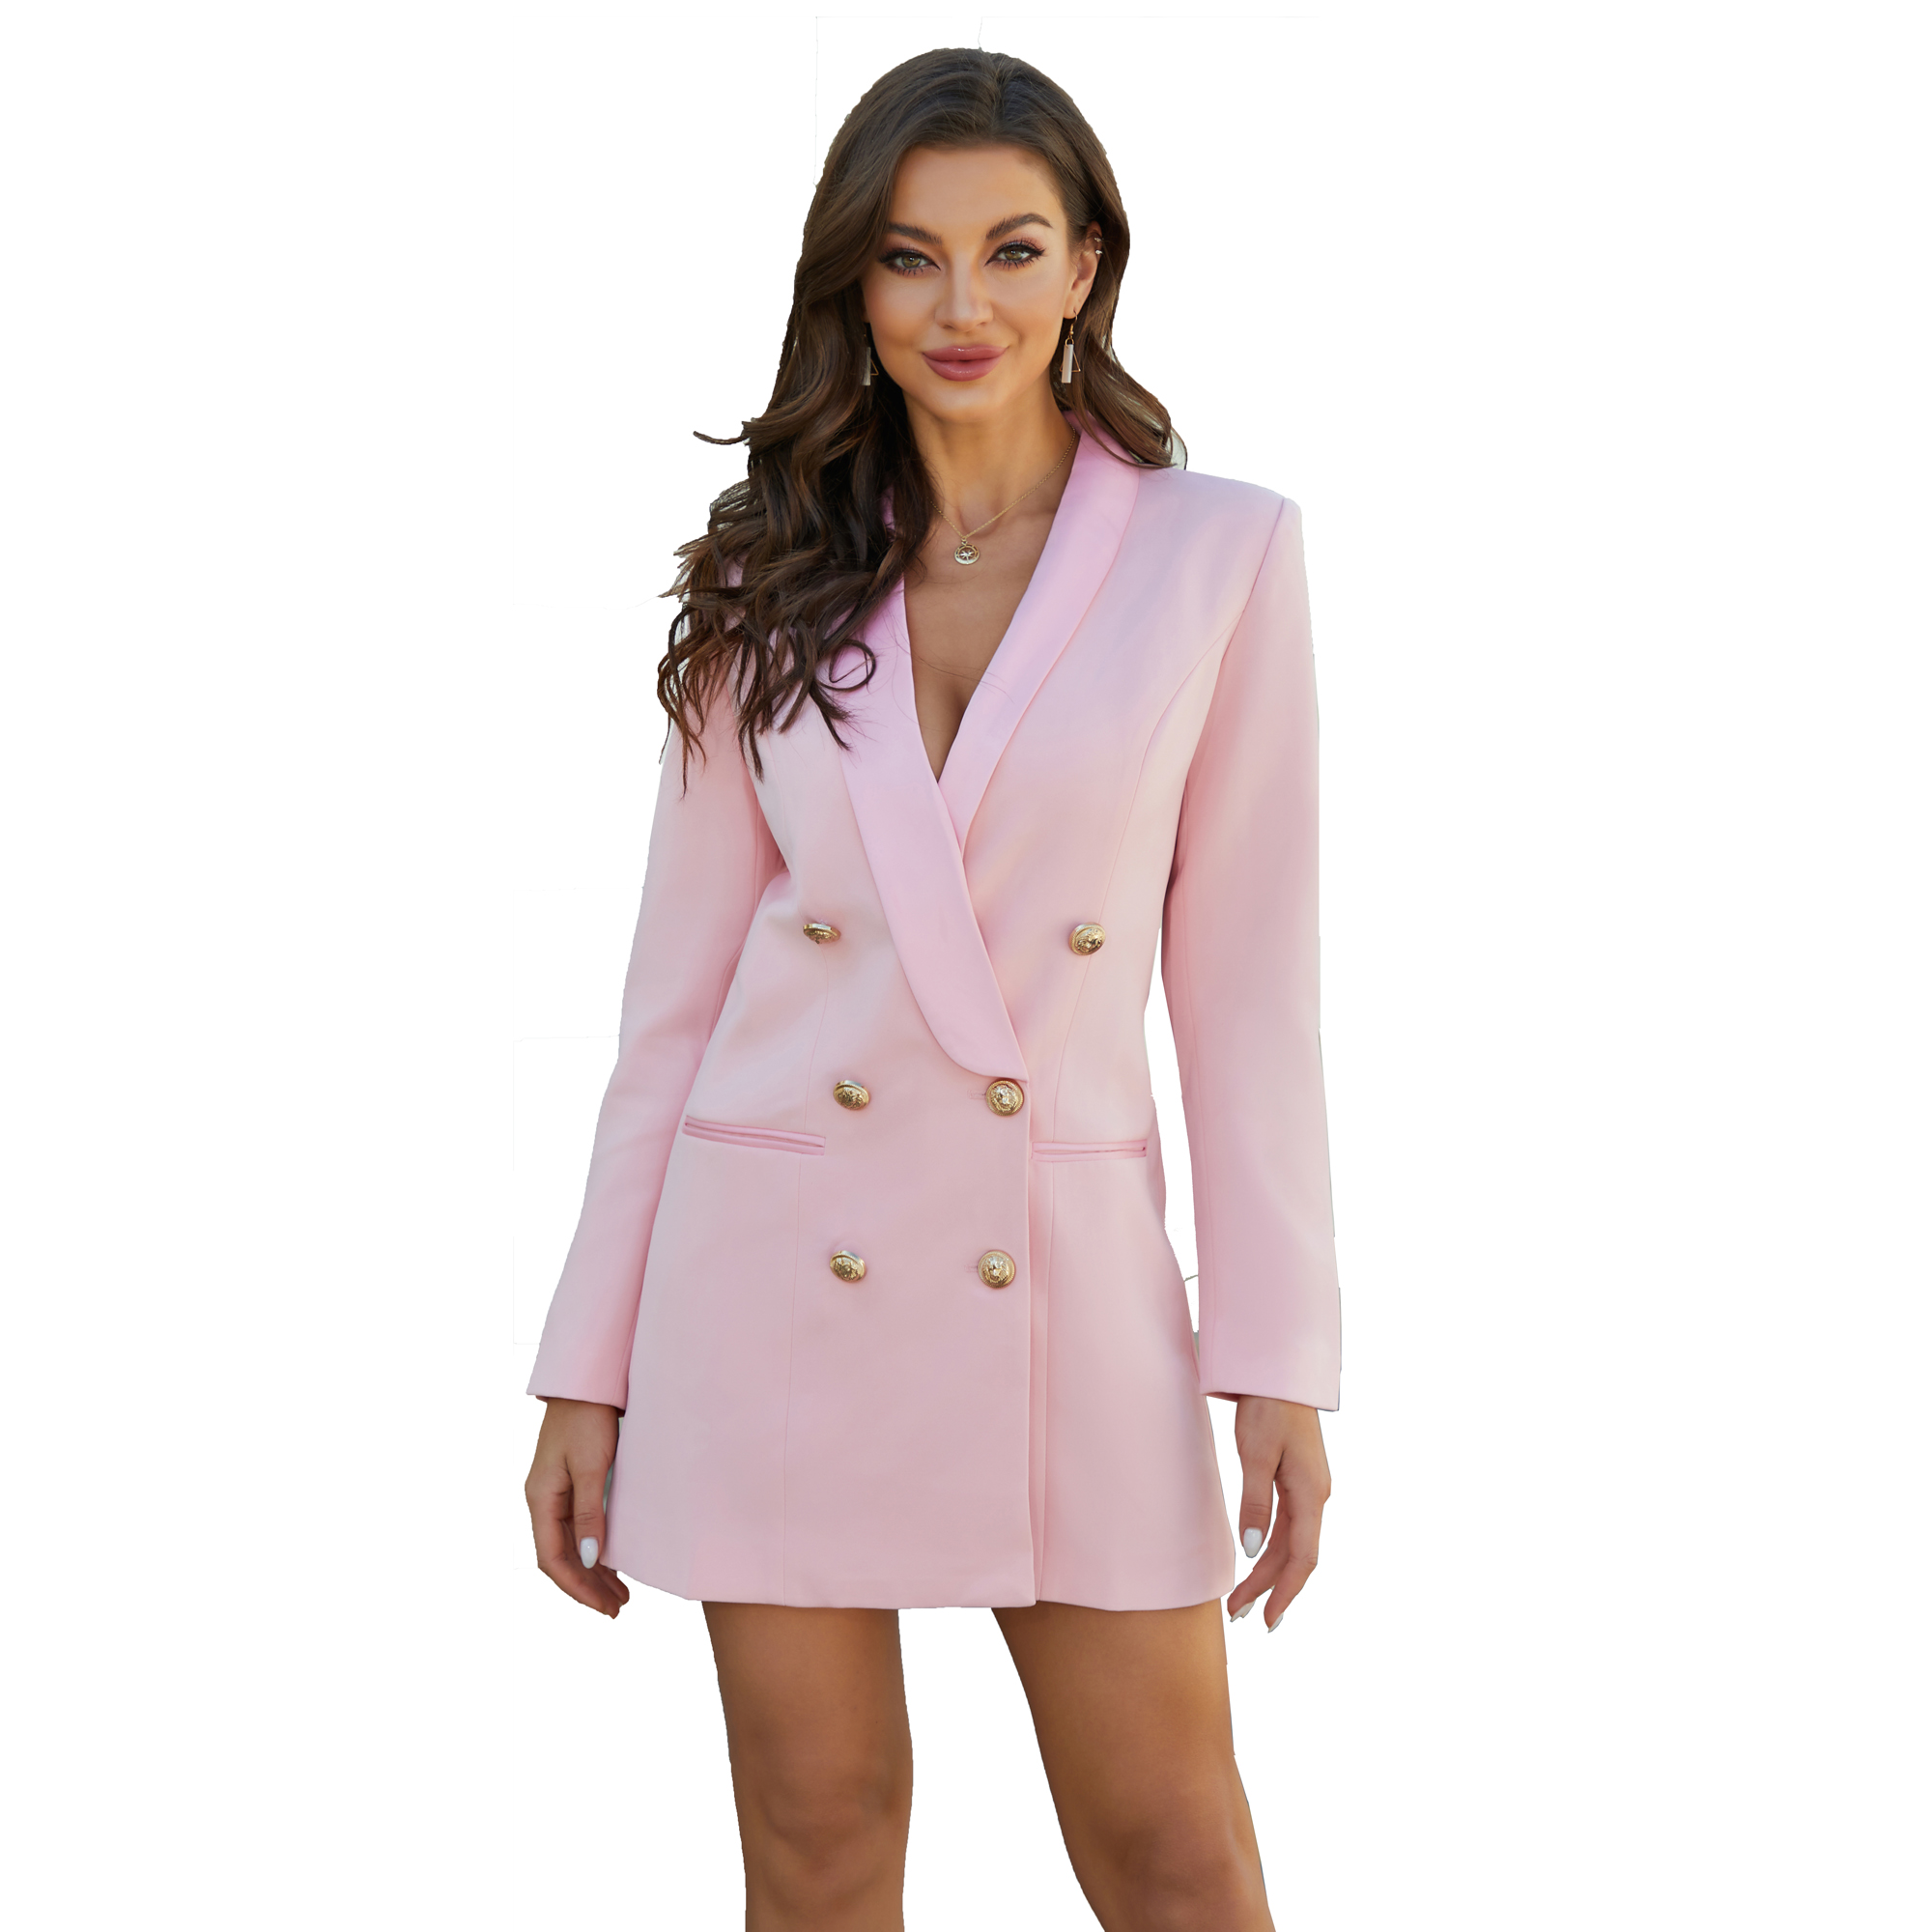 Double Breasted Blazer Short Dress